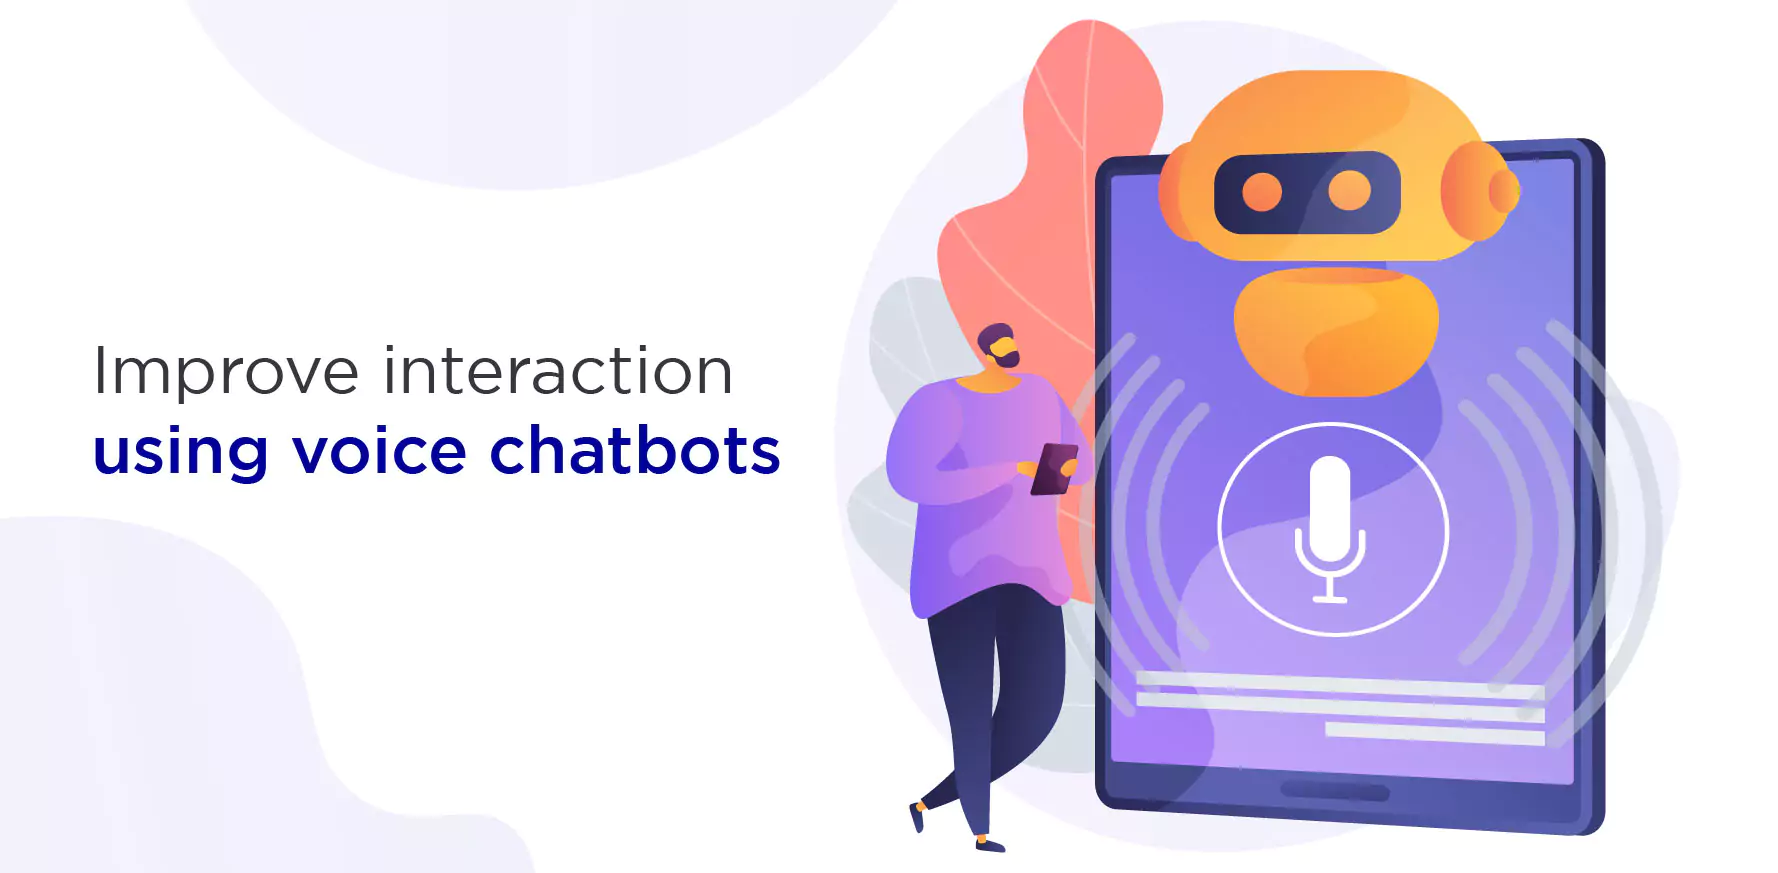 Improve interaction using voice chatbots